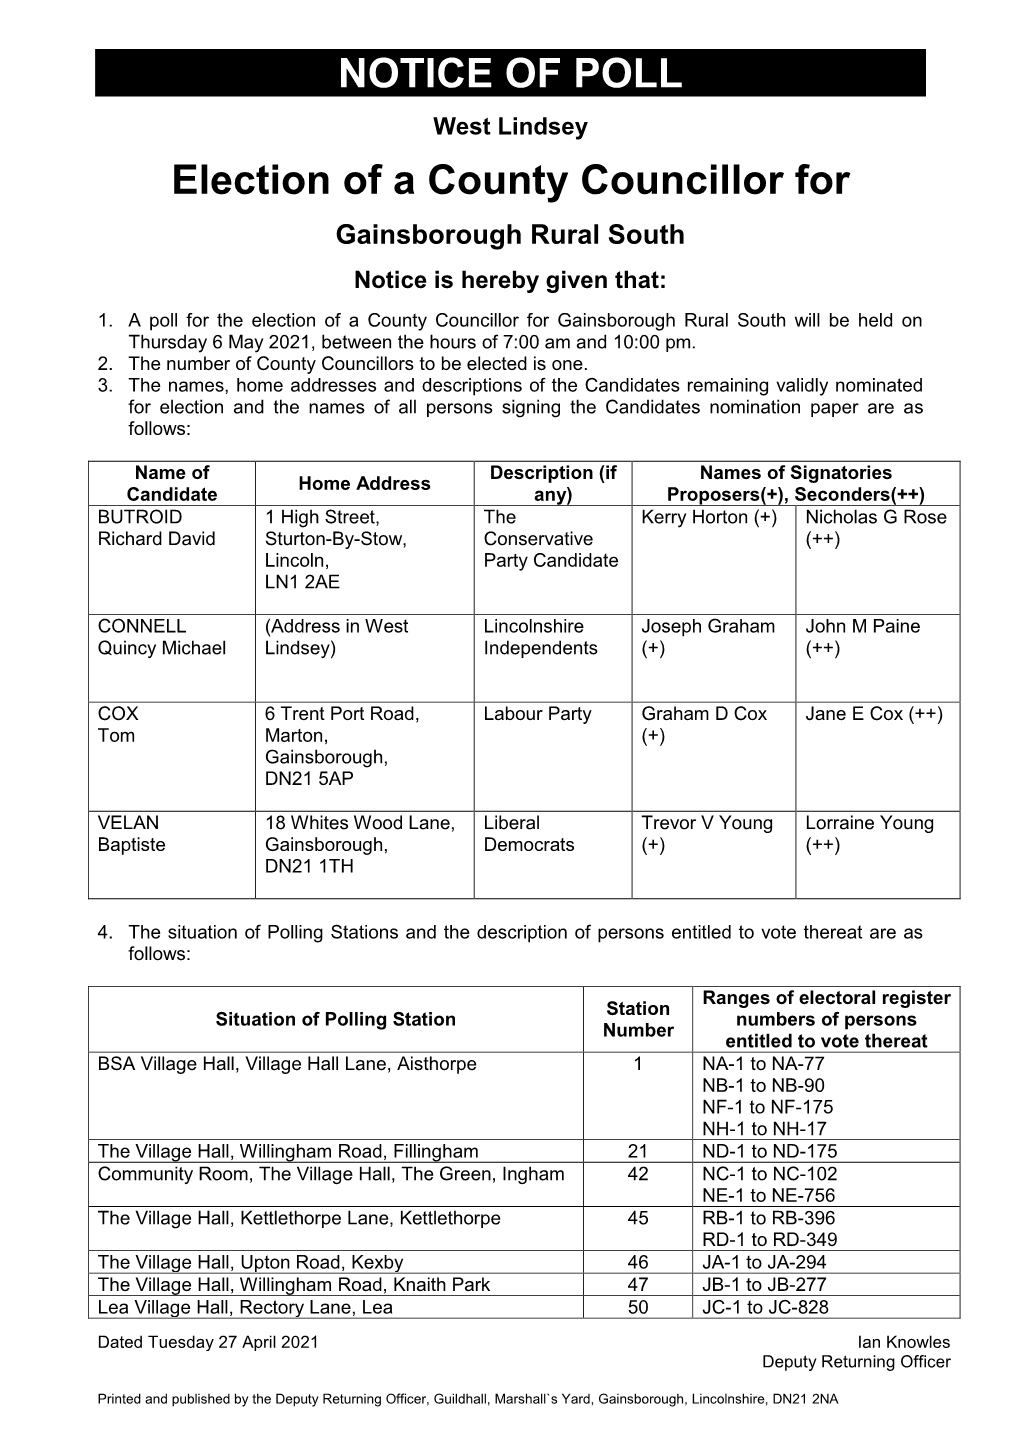 Notice of Poll Gainsborough Rural South